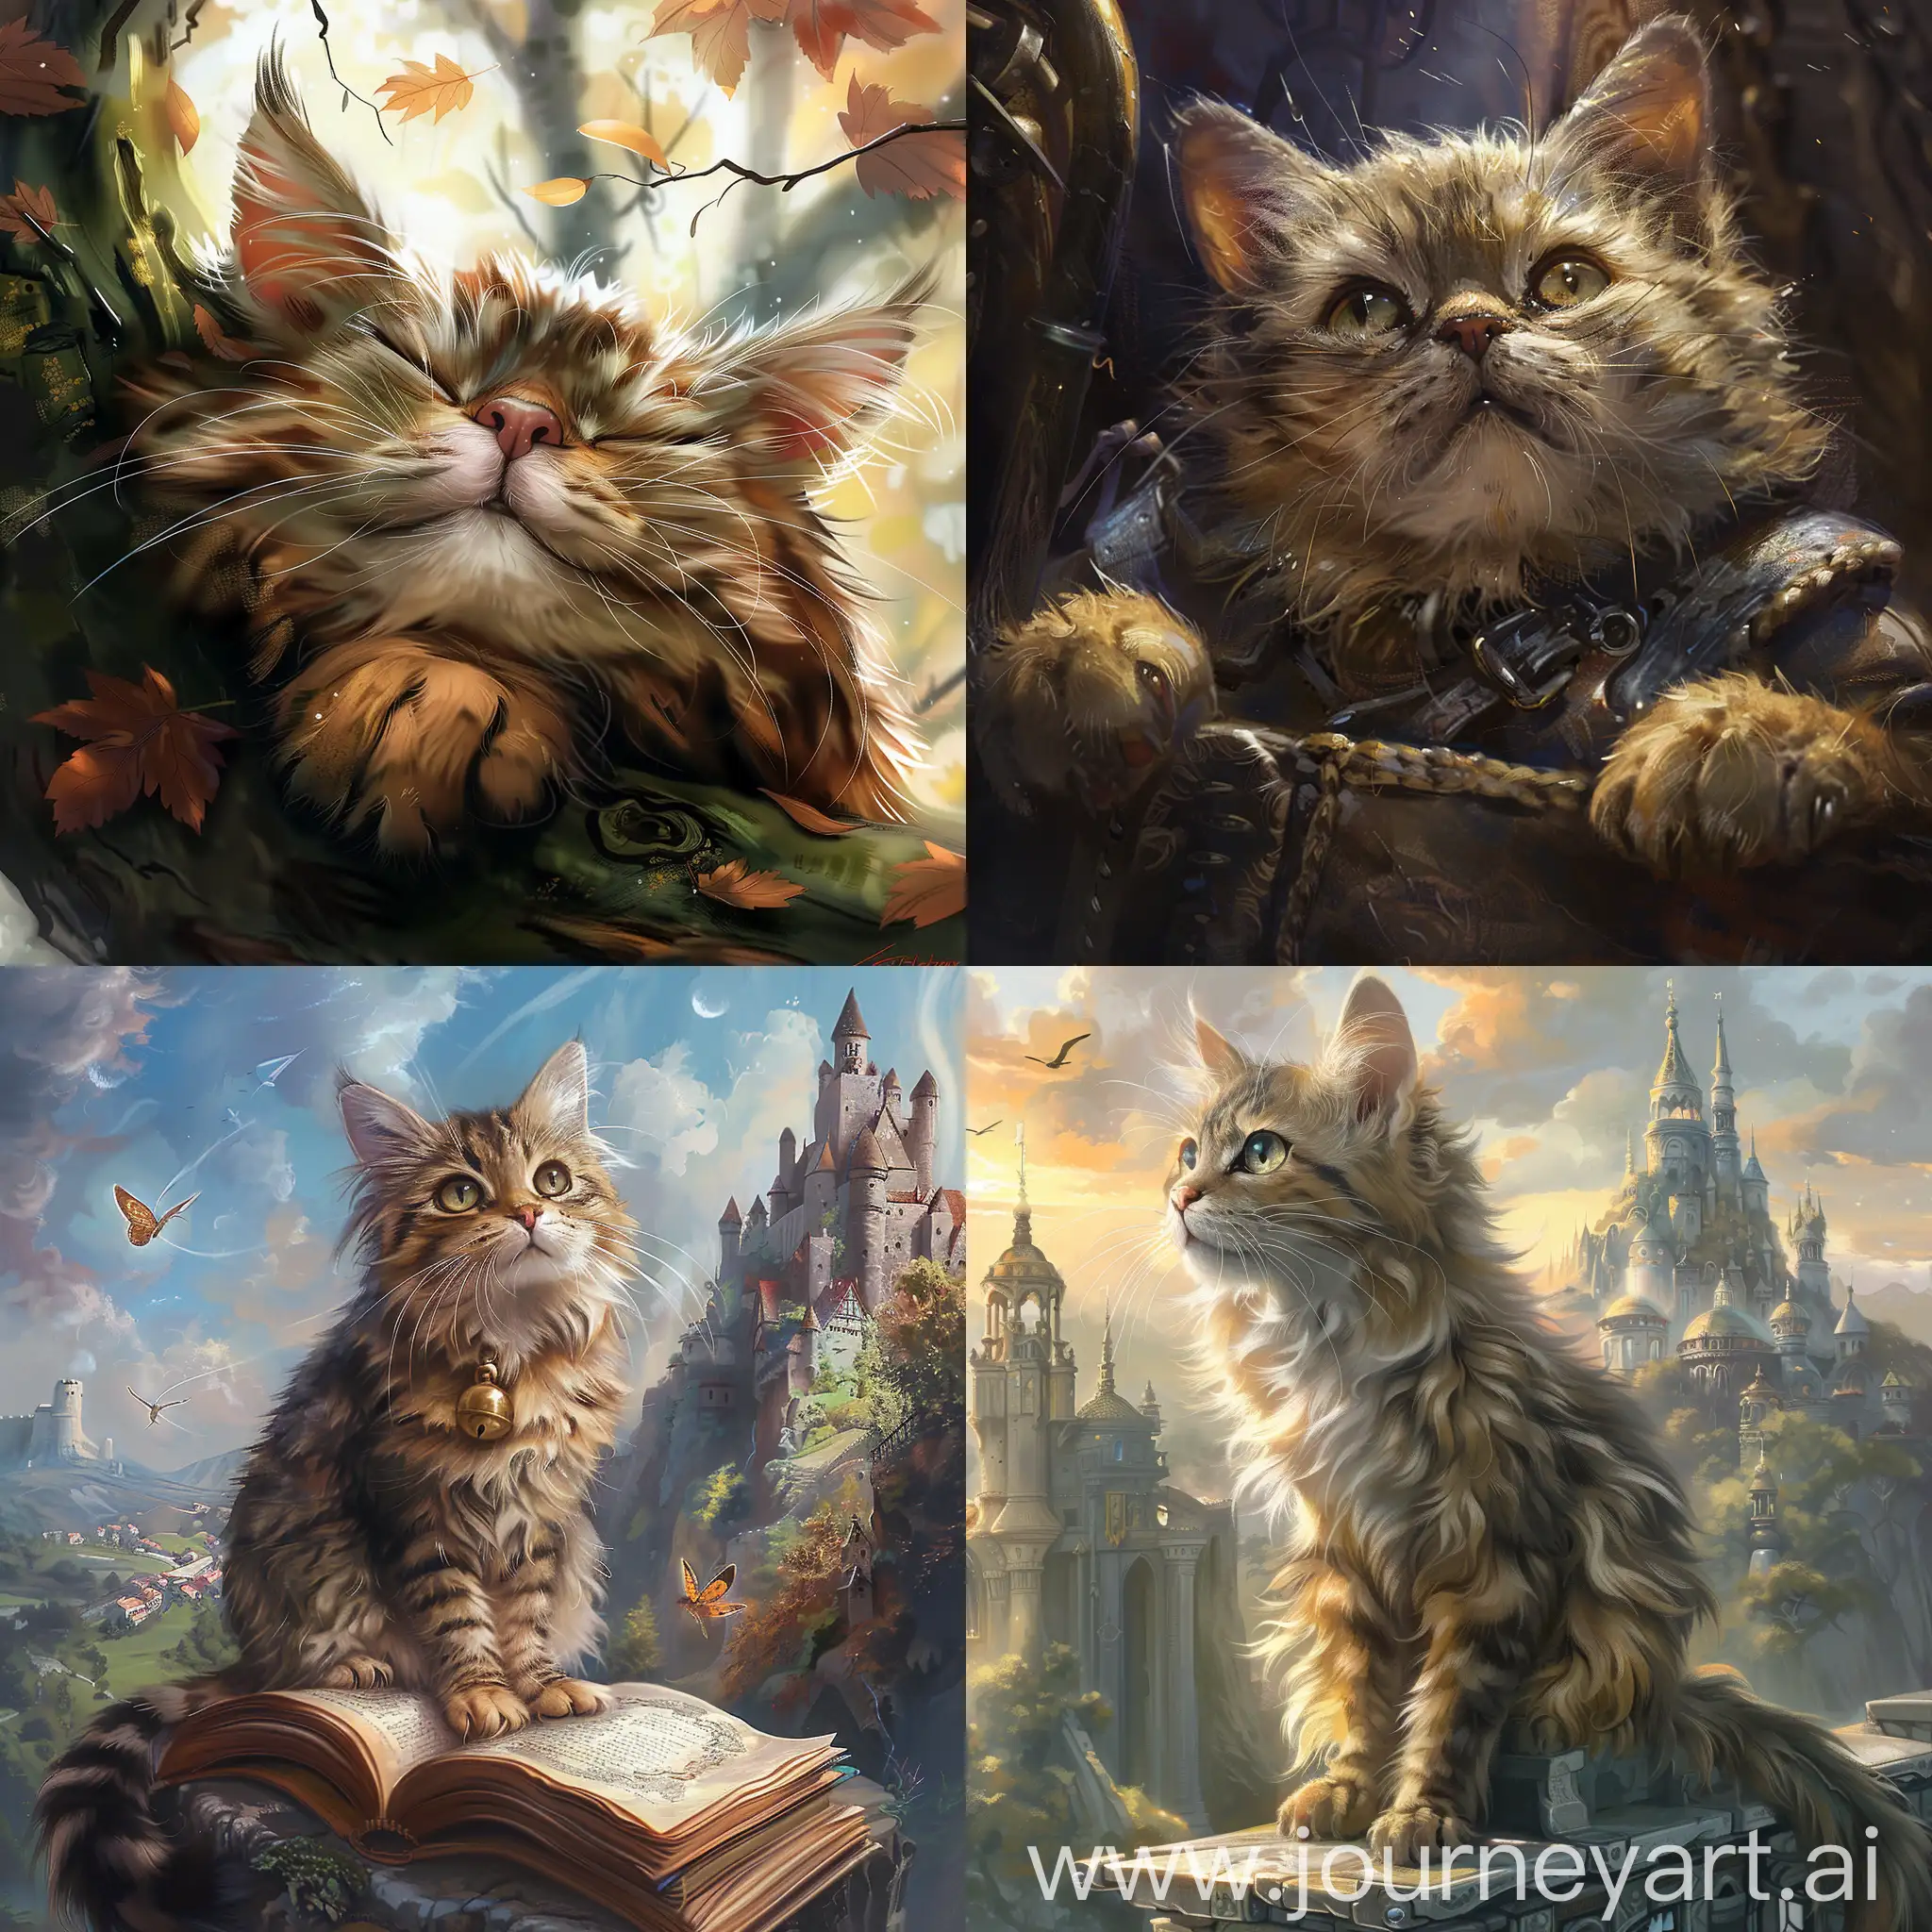 Playful-Cat-Exploring-Enchanting-Fantasy-Realm-in-High-Definition